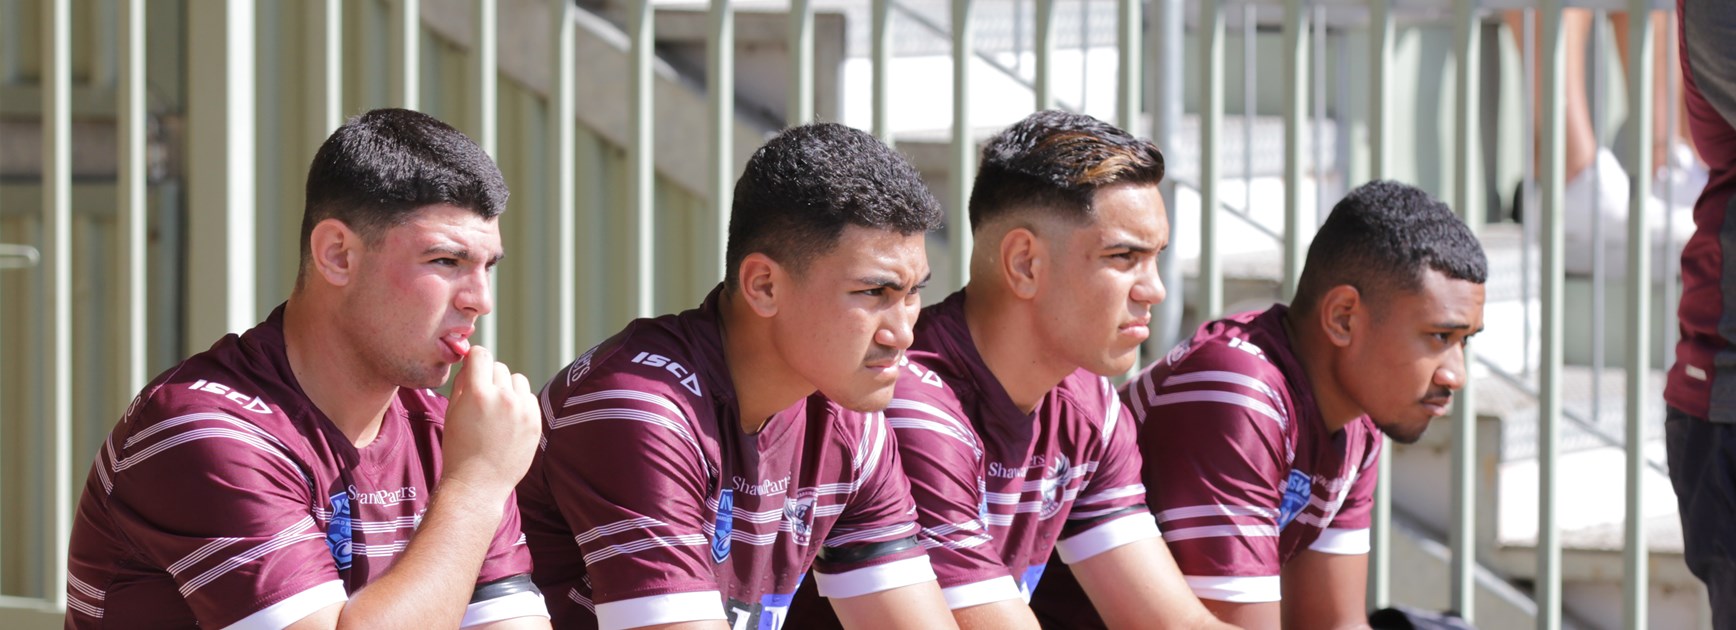 Manly Junior Rep teams for finals